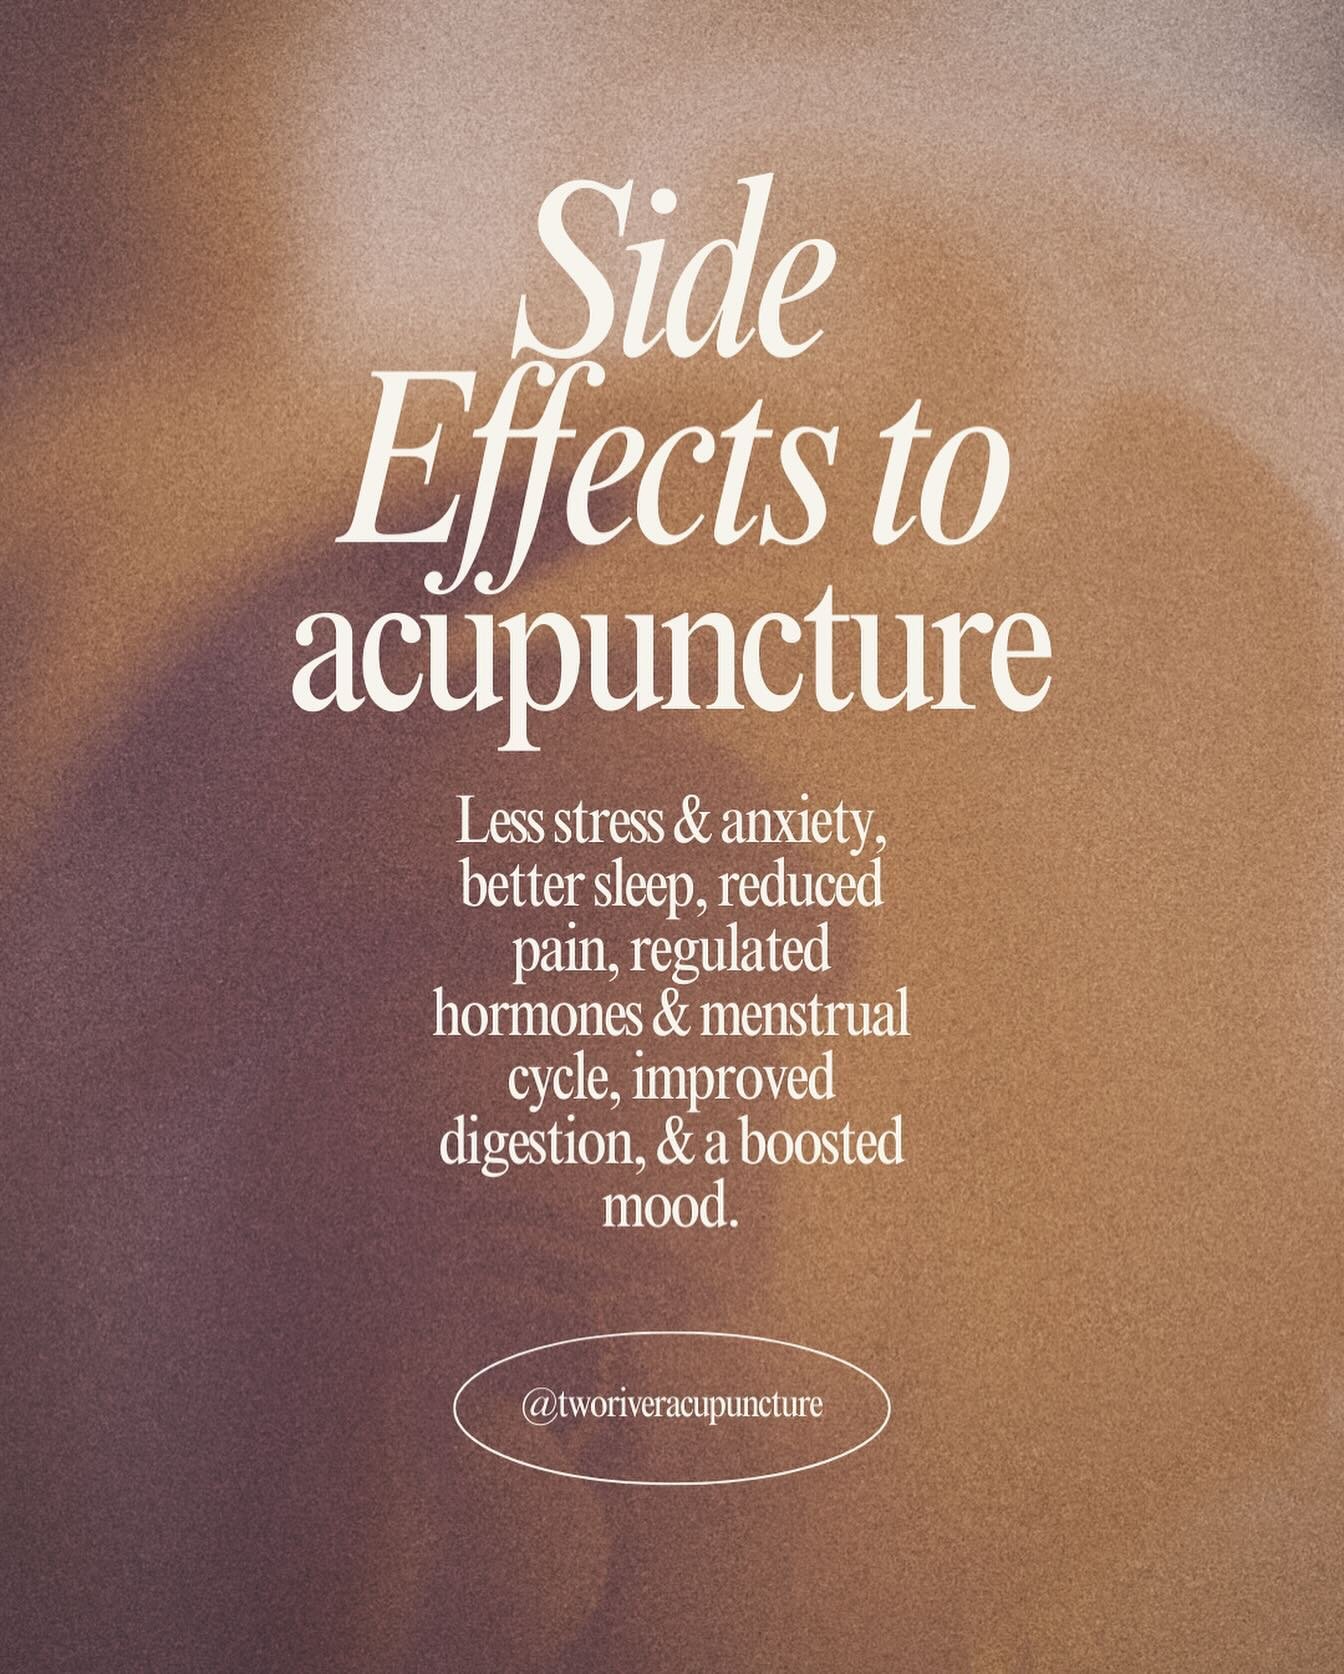 | SIDE EFFECTS TO ACUPUNCTURE |

.
.

Most commonly, B L I S S 🤎

#acupuncture #chinesemedicine #healthandwellness #selfcare #holisticlifestyle 
#rumsonnj #fairhavennj #littlesilvernj #redbanknj #monmouthcounty